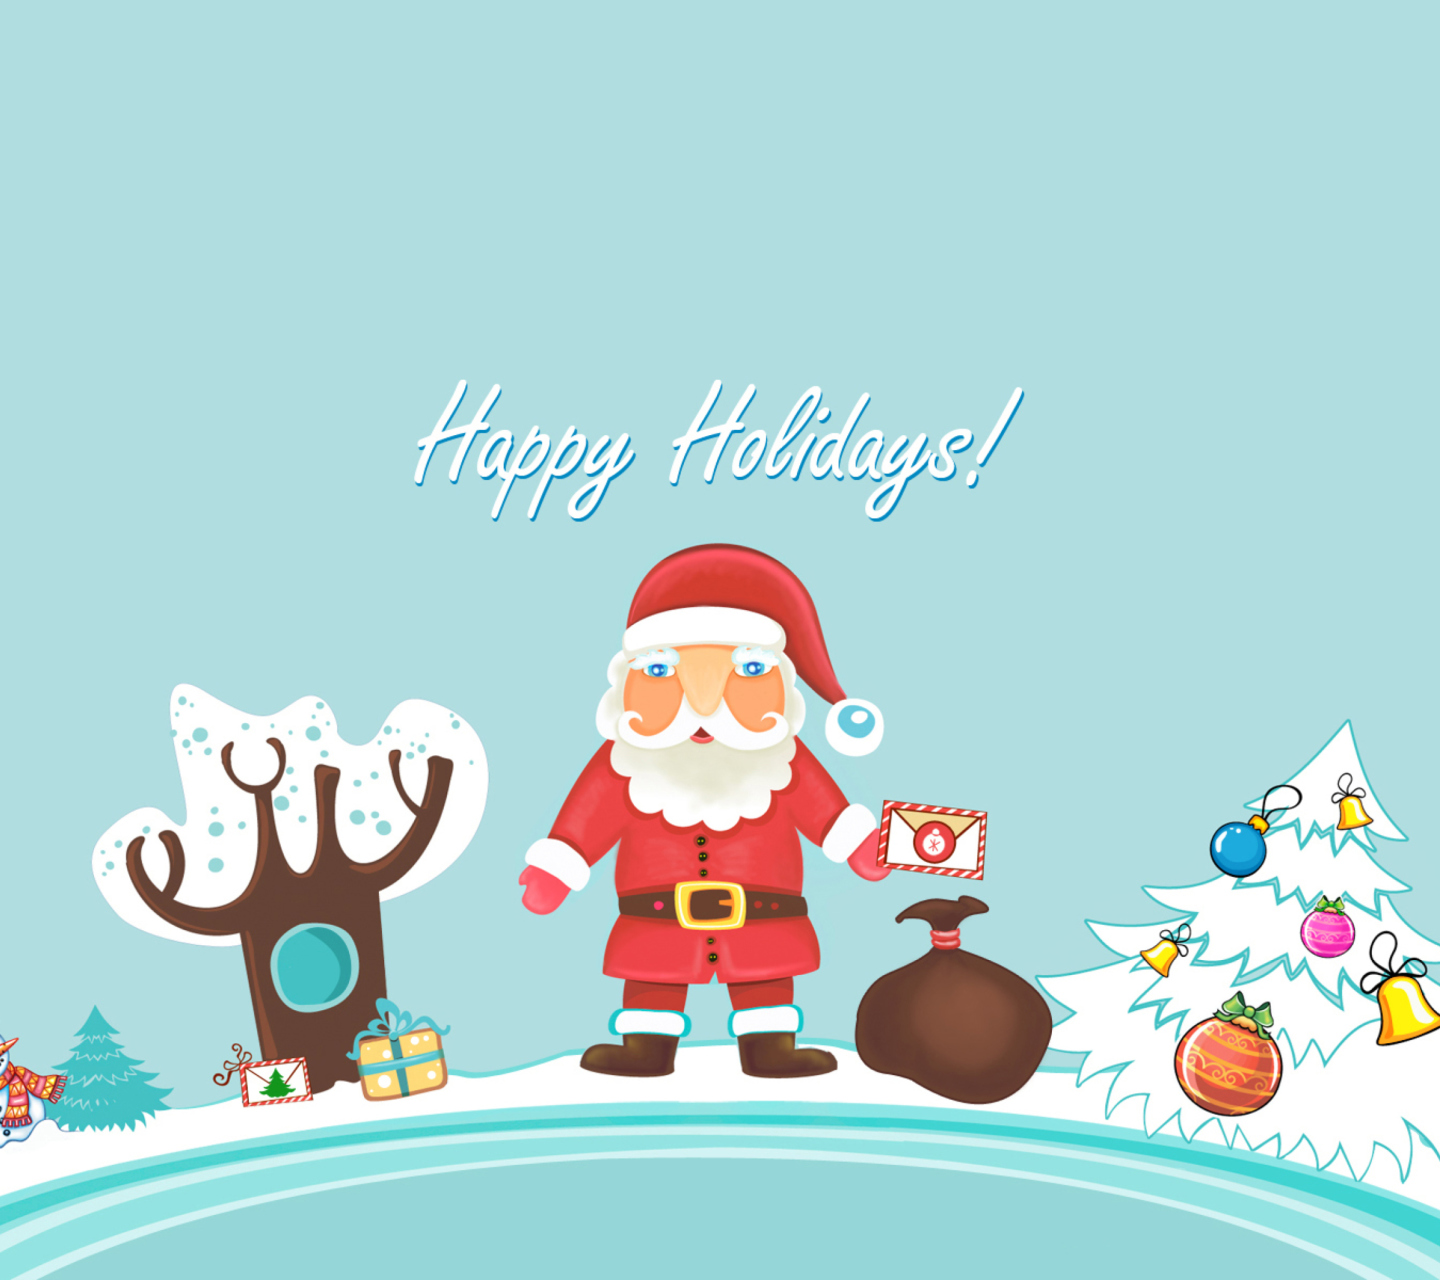 Santa Claus Wishes You Happy Holidays wallpaper 1440x1280